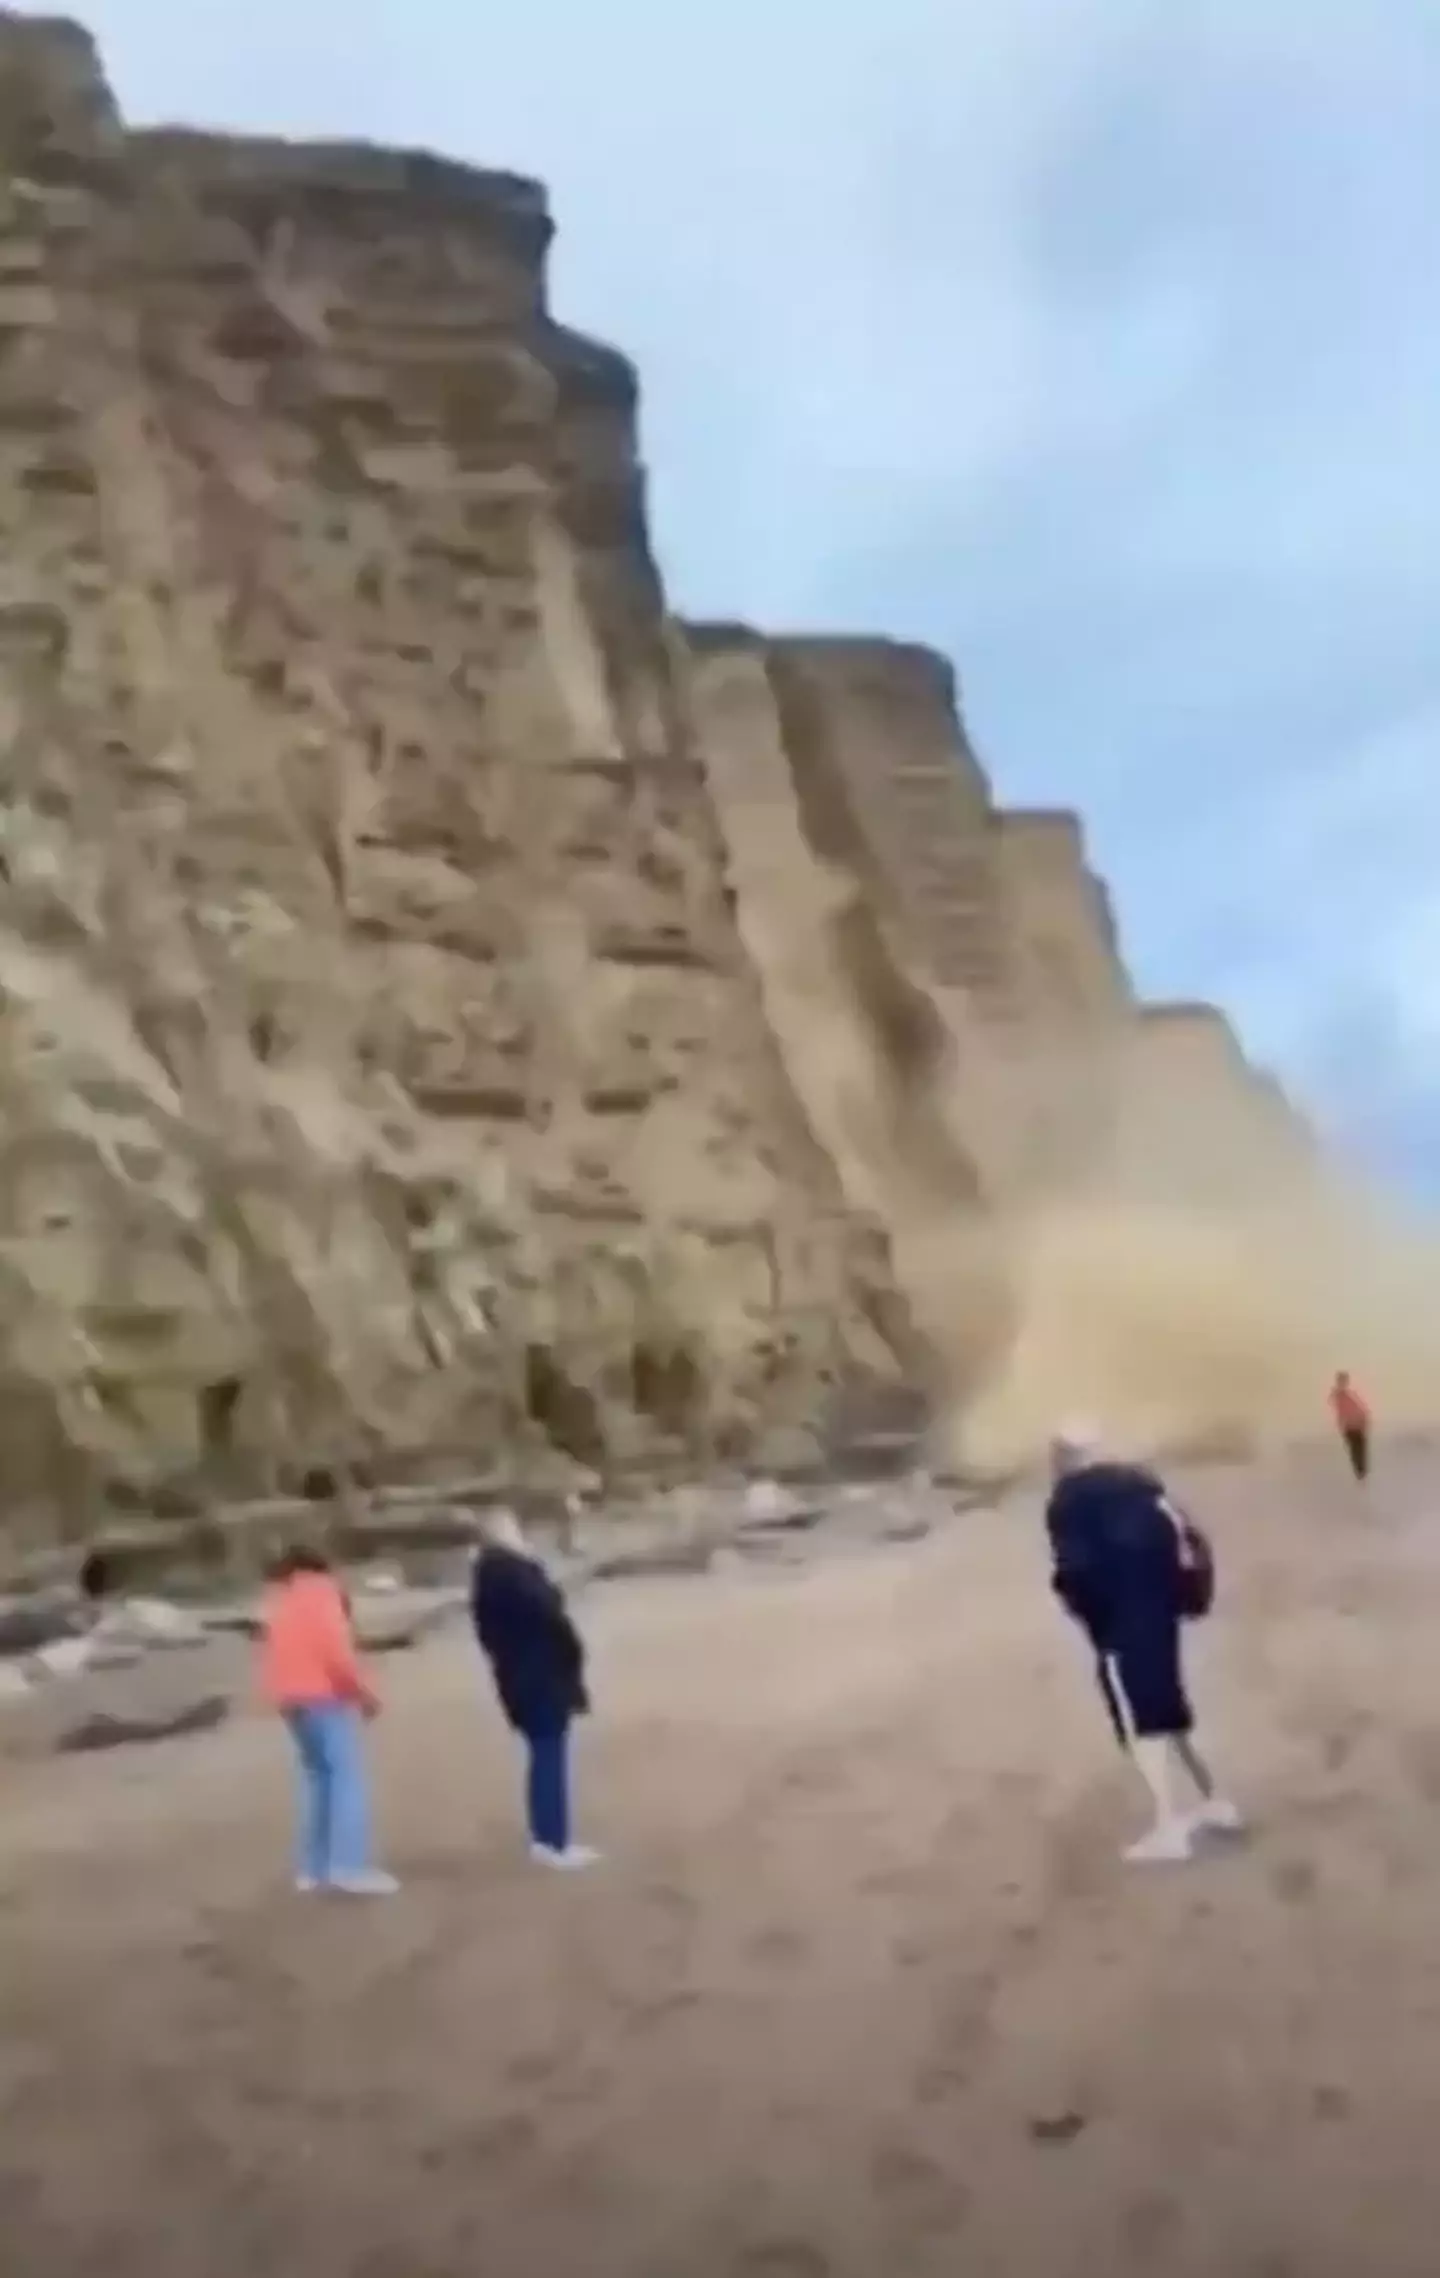 Several people were at the beach when the cliff collapsed.